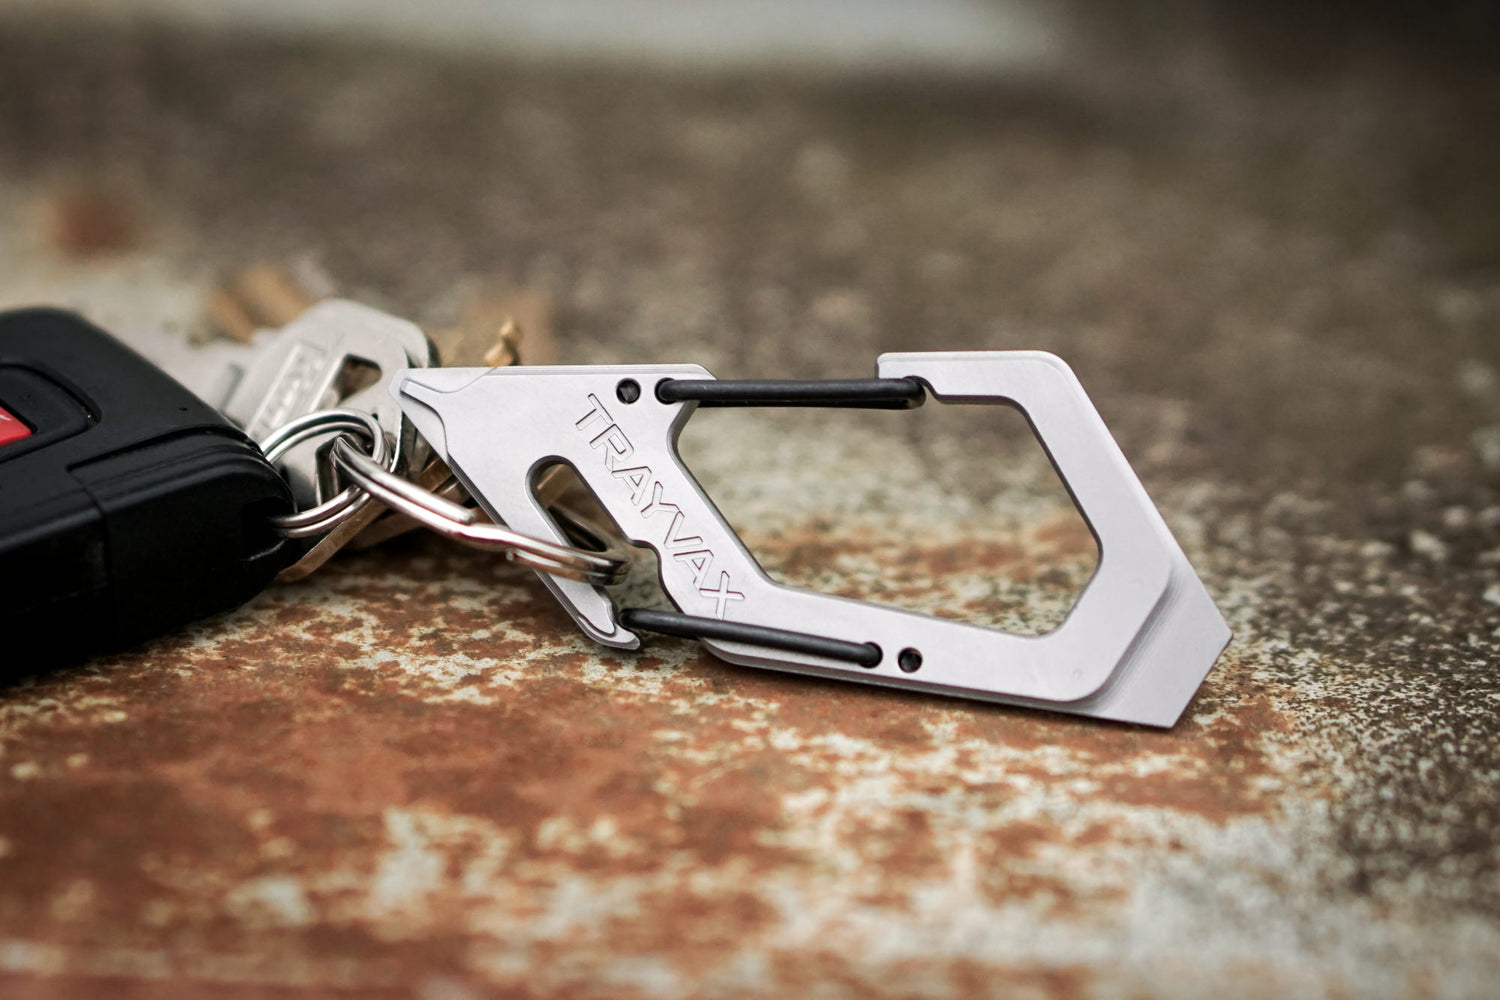 Talon Carabiner Clip Made From 420 Steel And S35VN